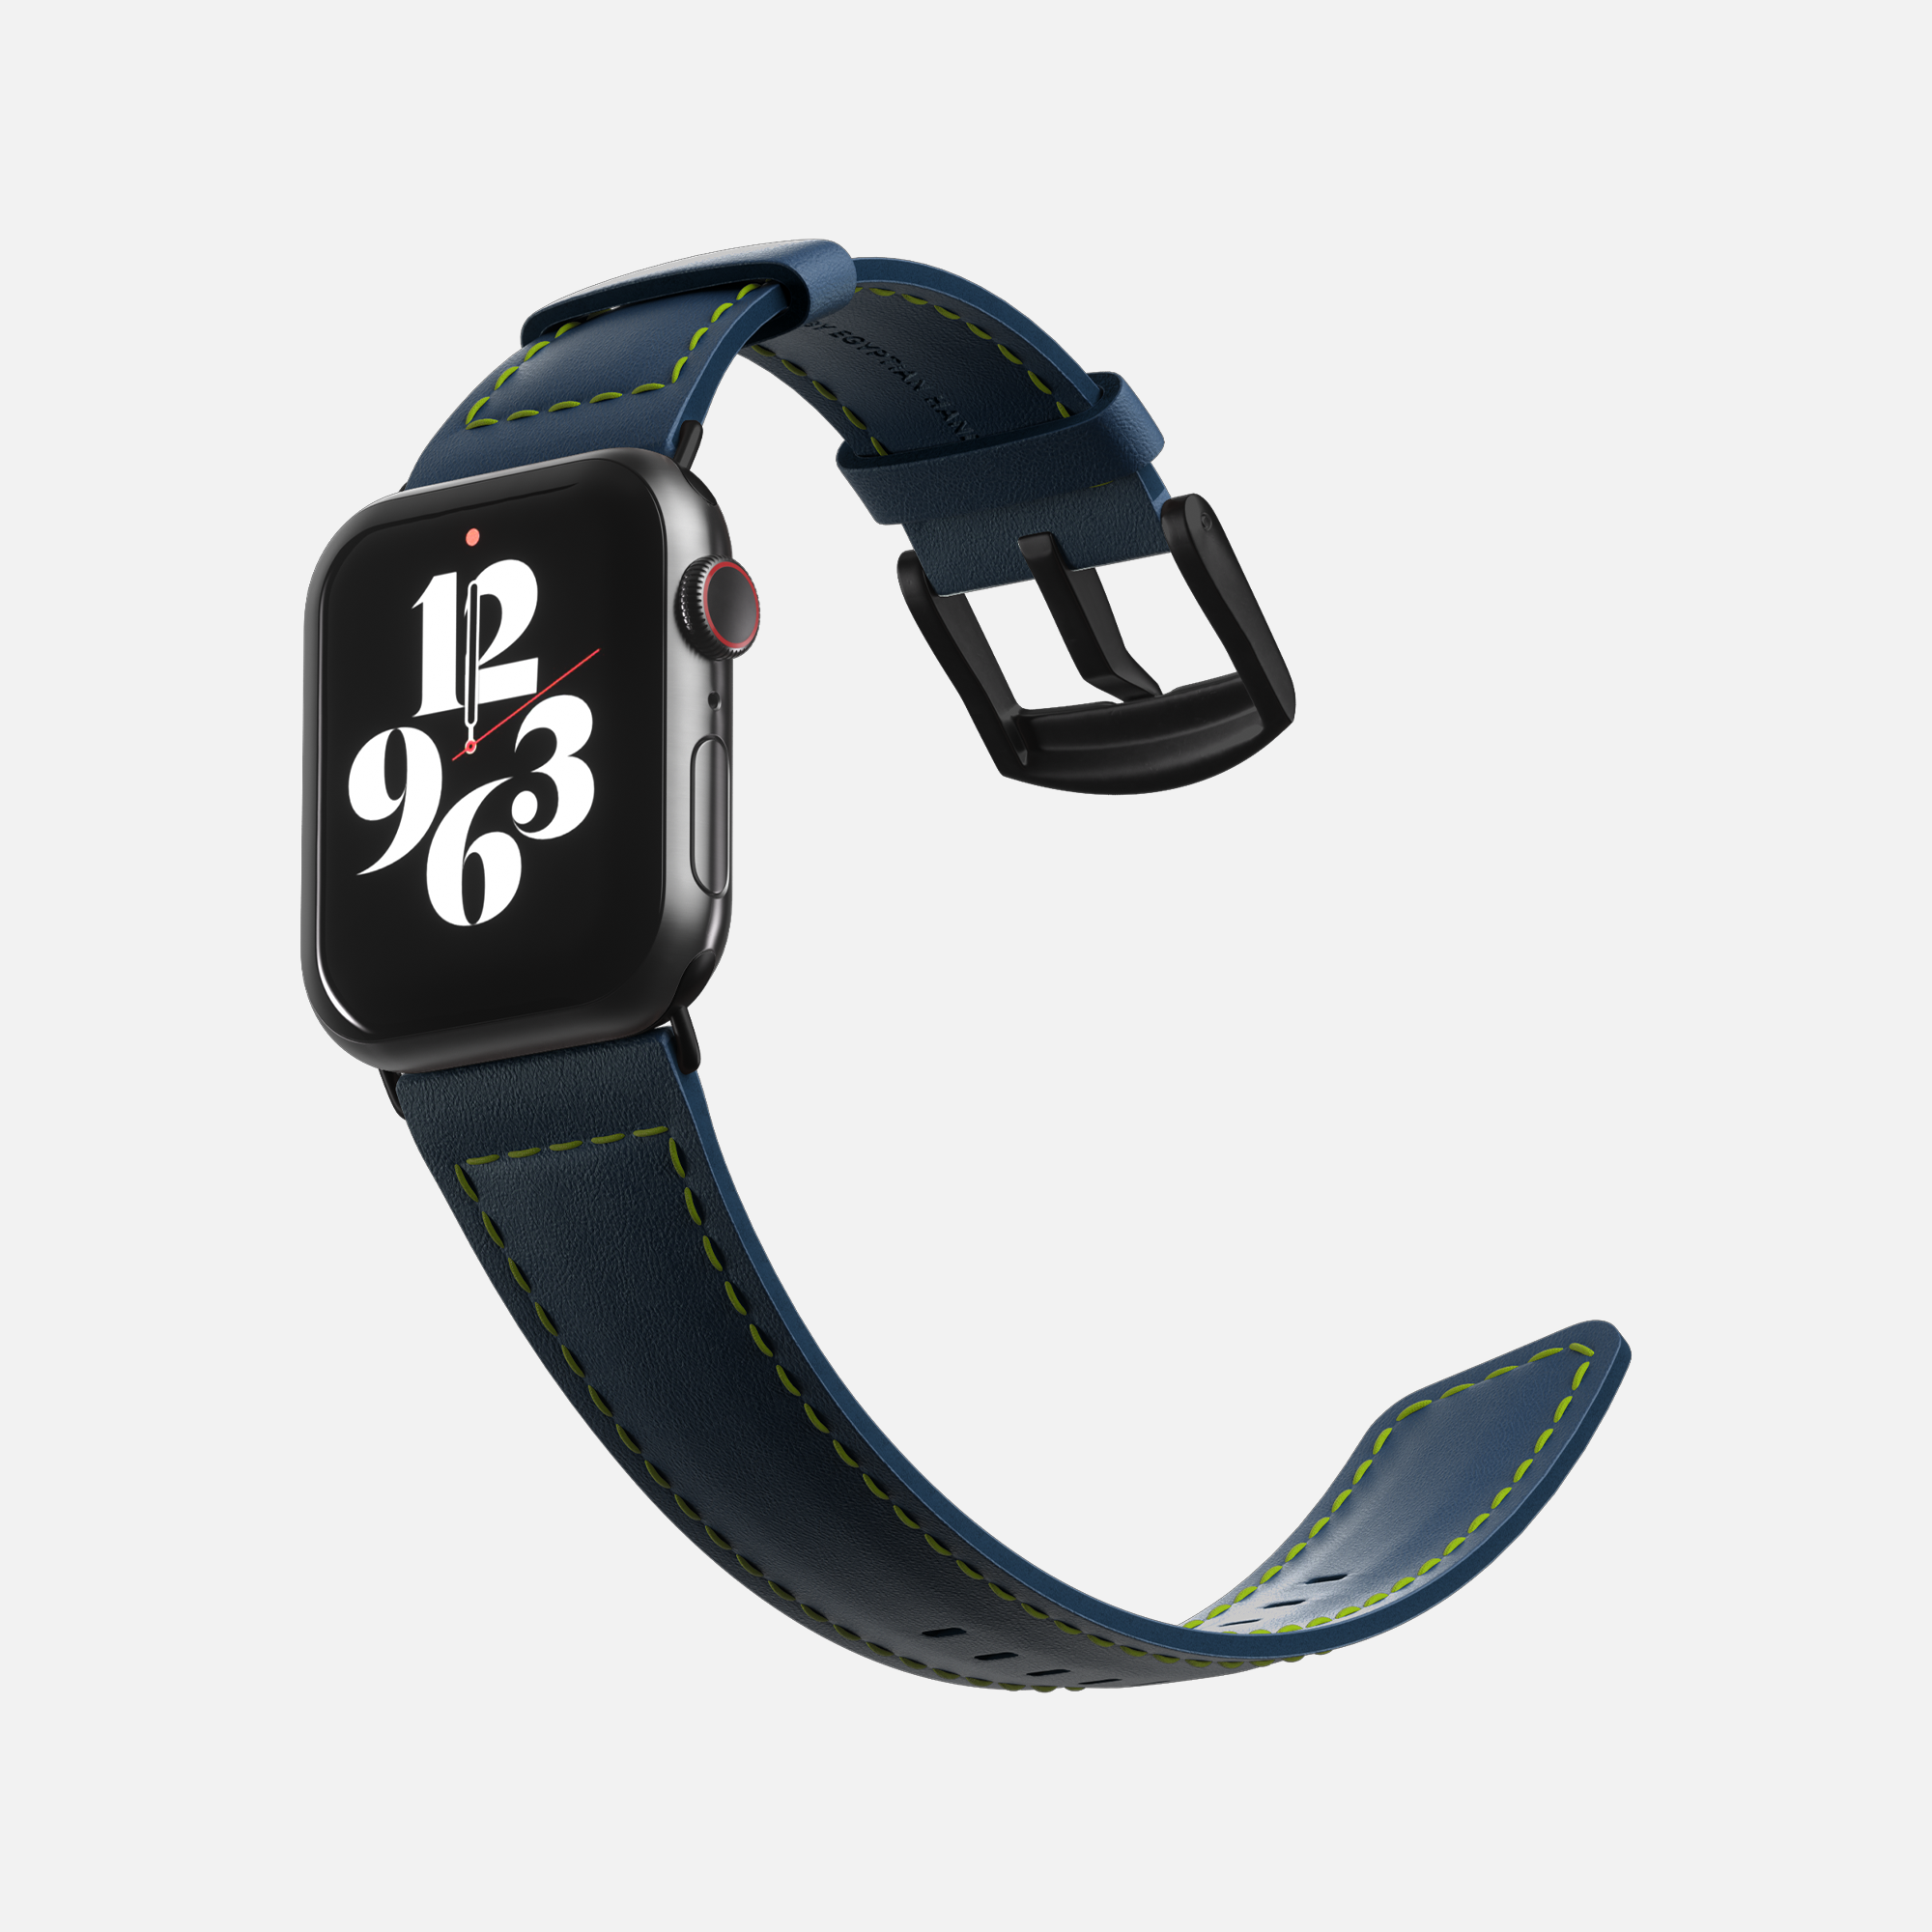 Modern Apple smartwatch with navy blue strap and customizable digital clock face floating on white background.